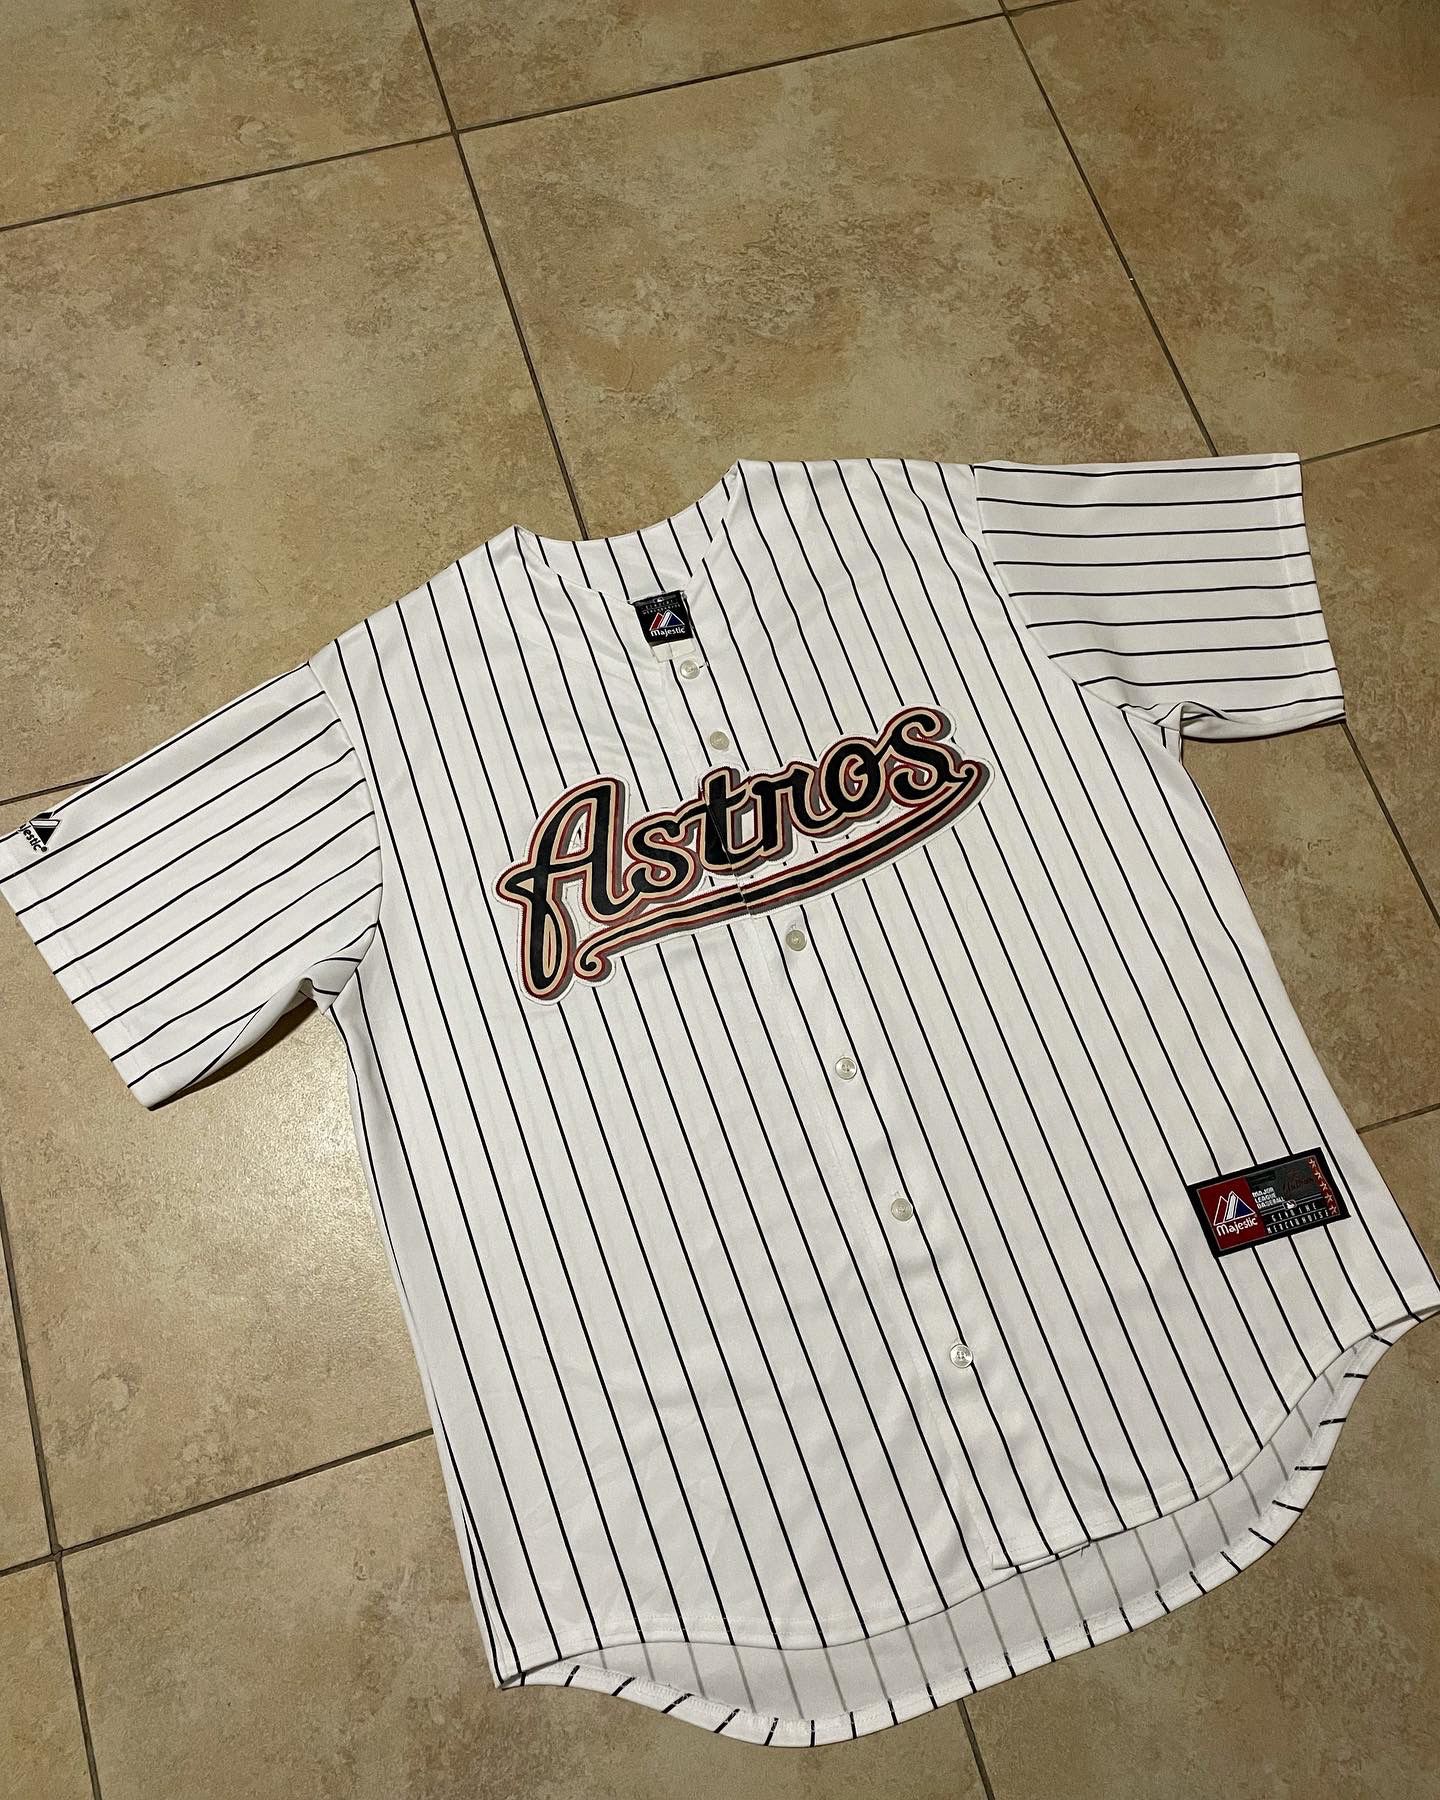 Vintage 90s Gold Houston Astros Jersey Stitched throwback Retro Nike Jordan  Majestic Shirt for Sale in Sugar Land, TX - OfferUp